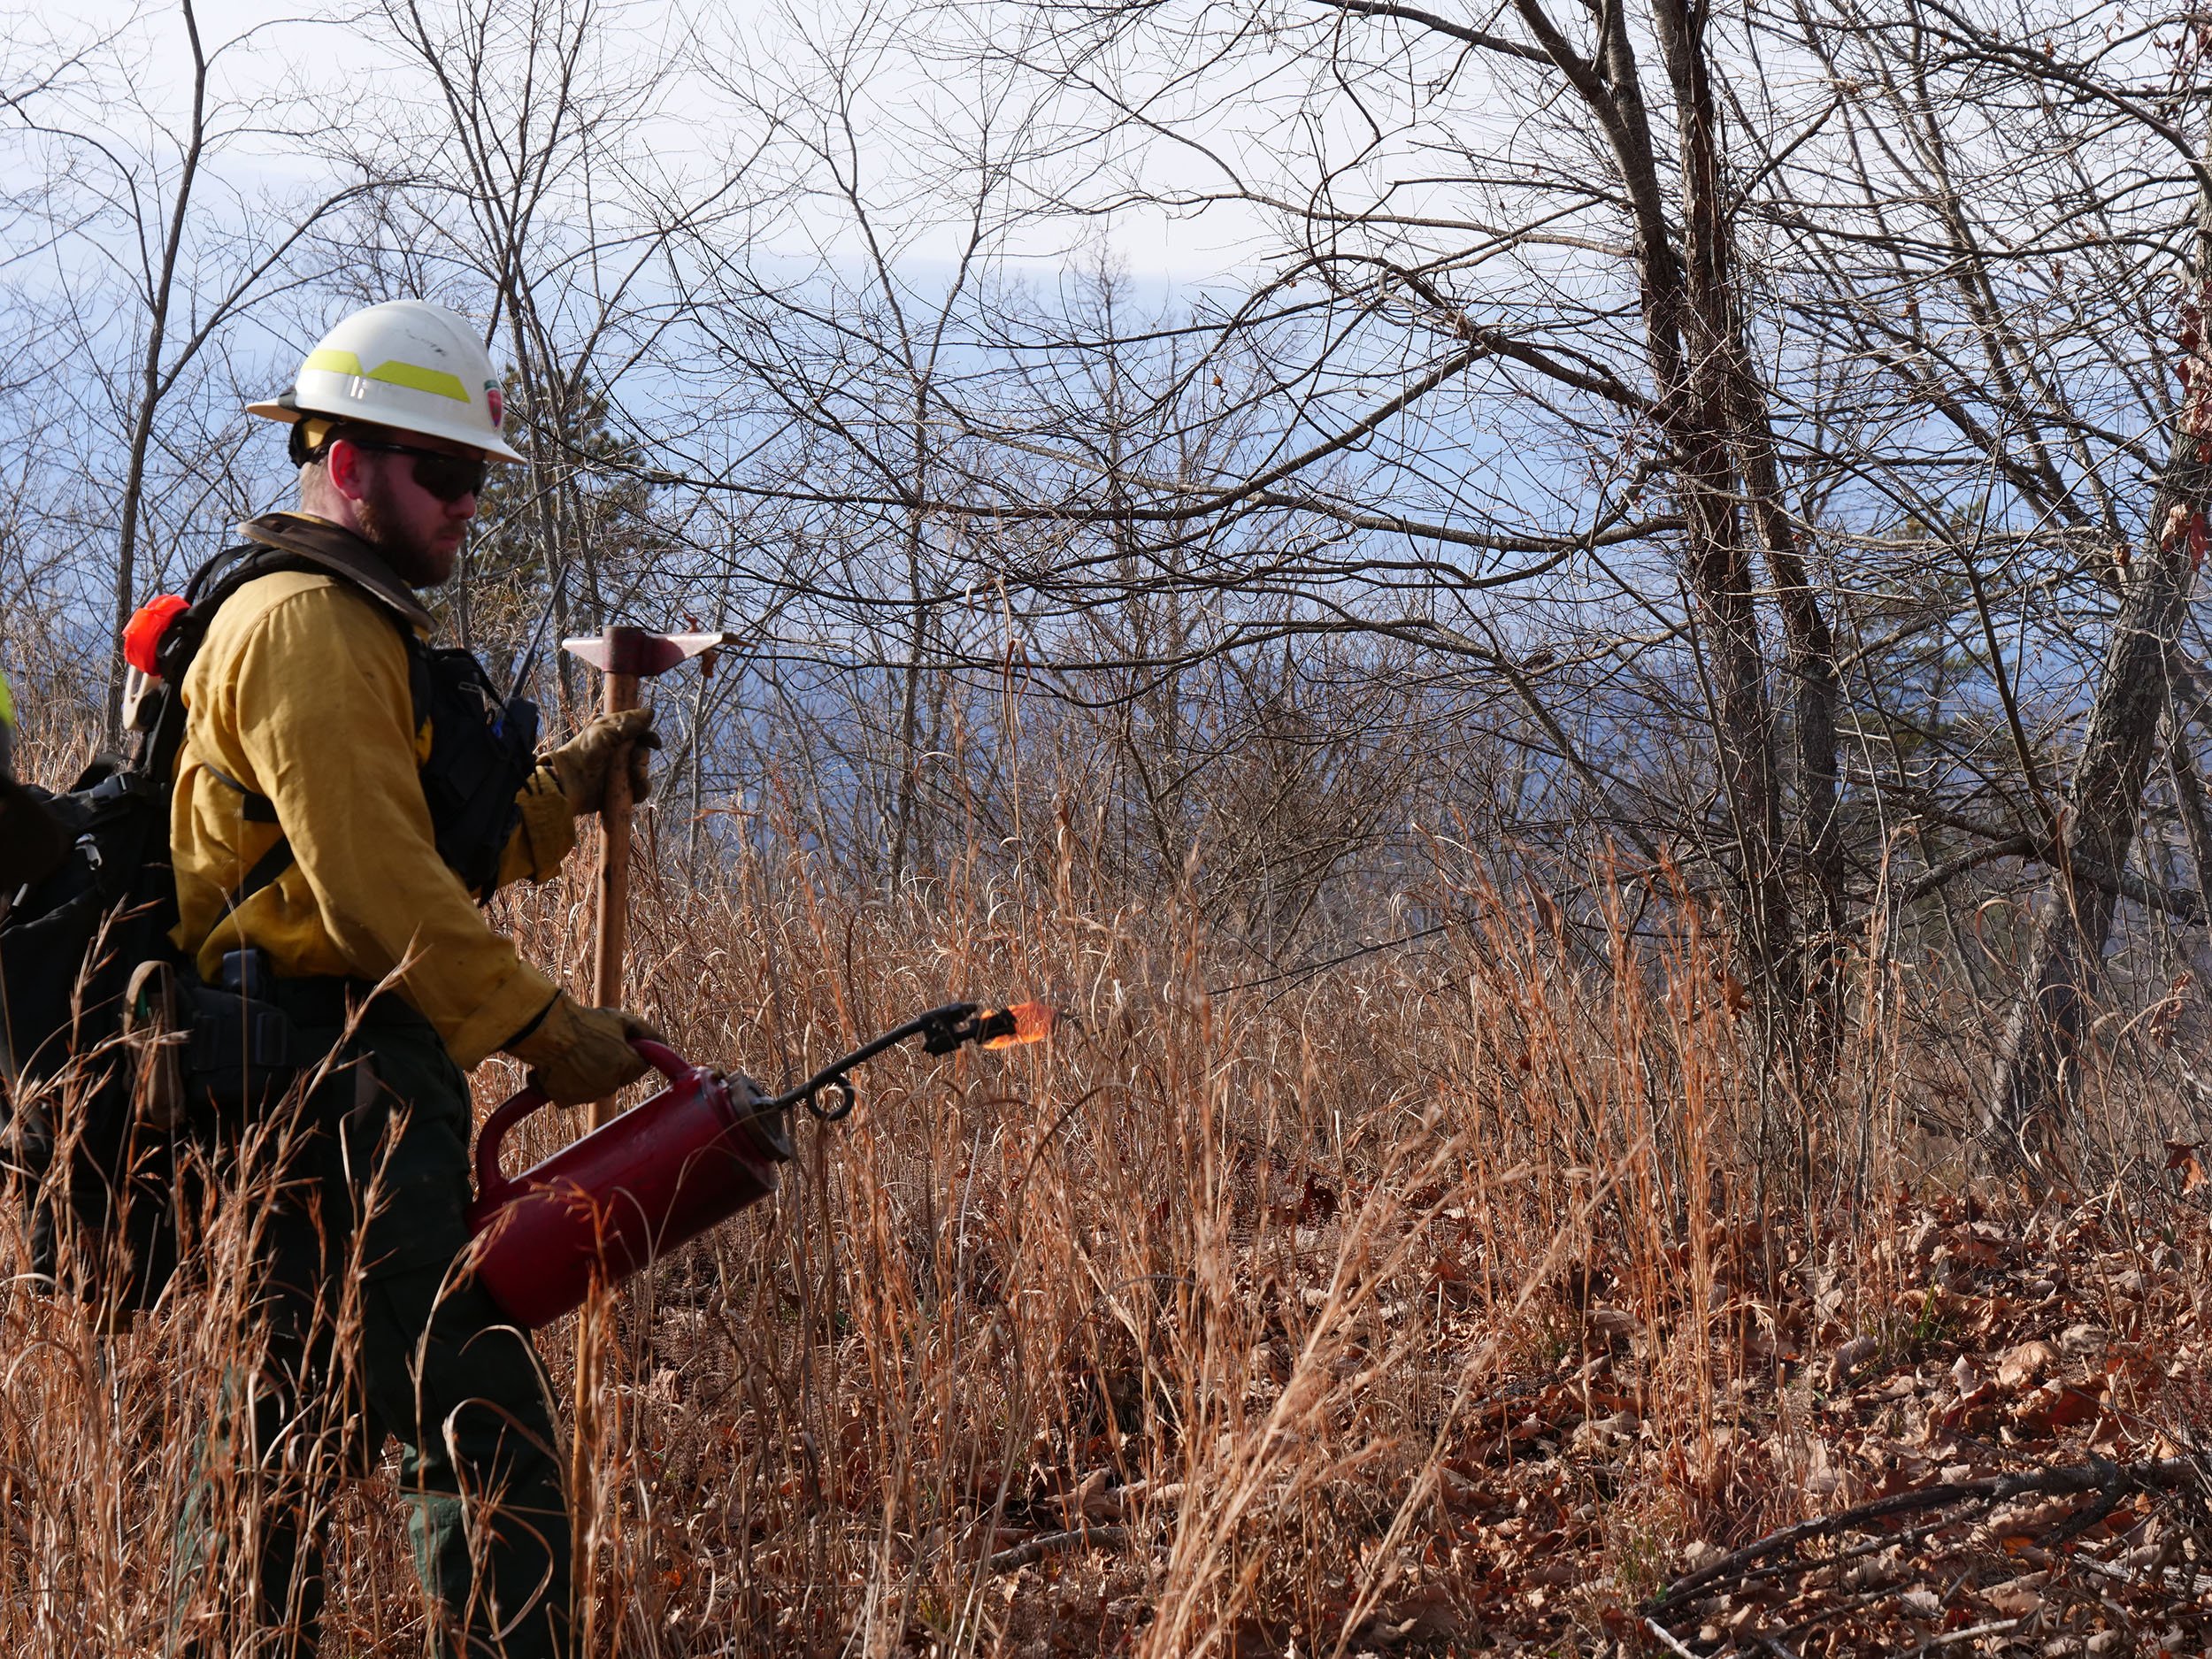 Alumnus Johnny Vest (’15 natural resources conservation) of the Virginia Department of Forestry prepares for ignition using a drip torch